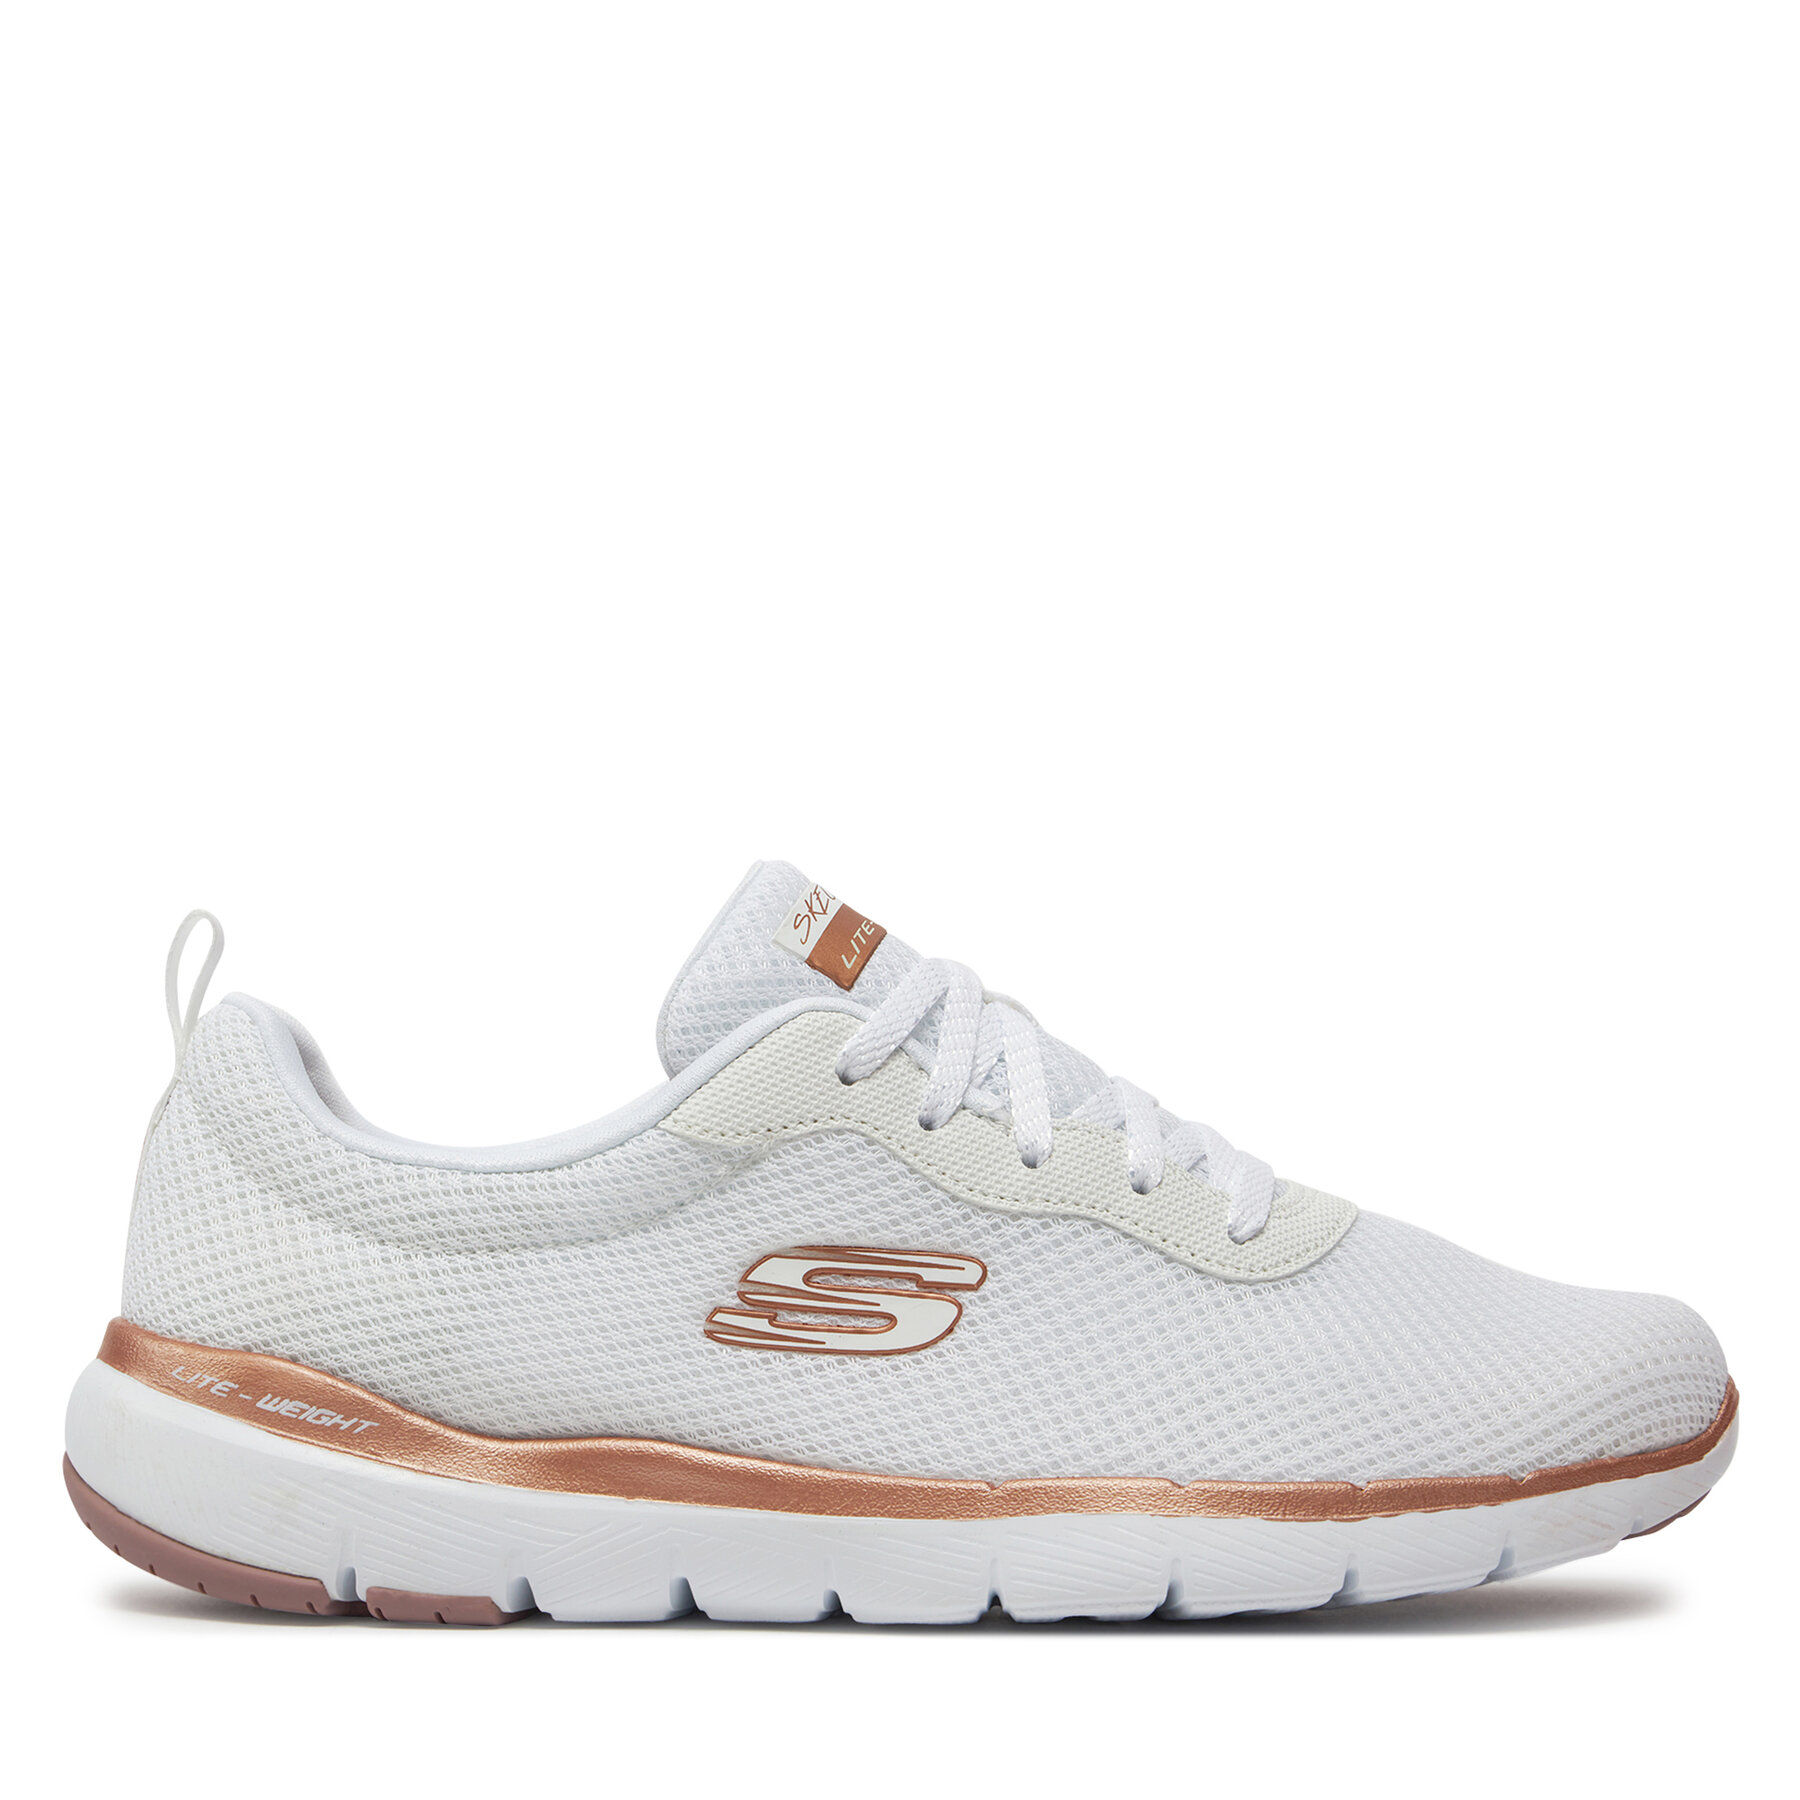 Sneakers Skechers First Insight 13070/WTRG White Rose Gold von Skechers